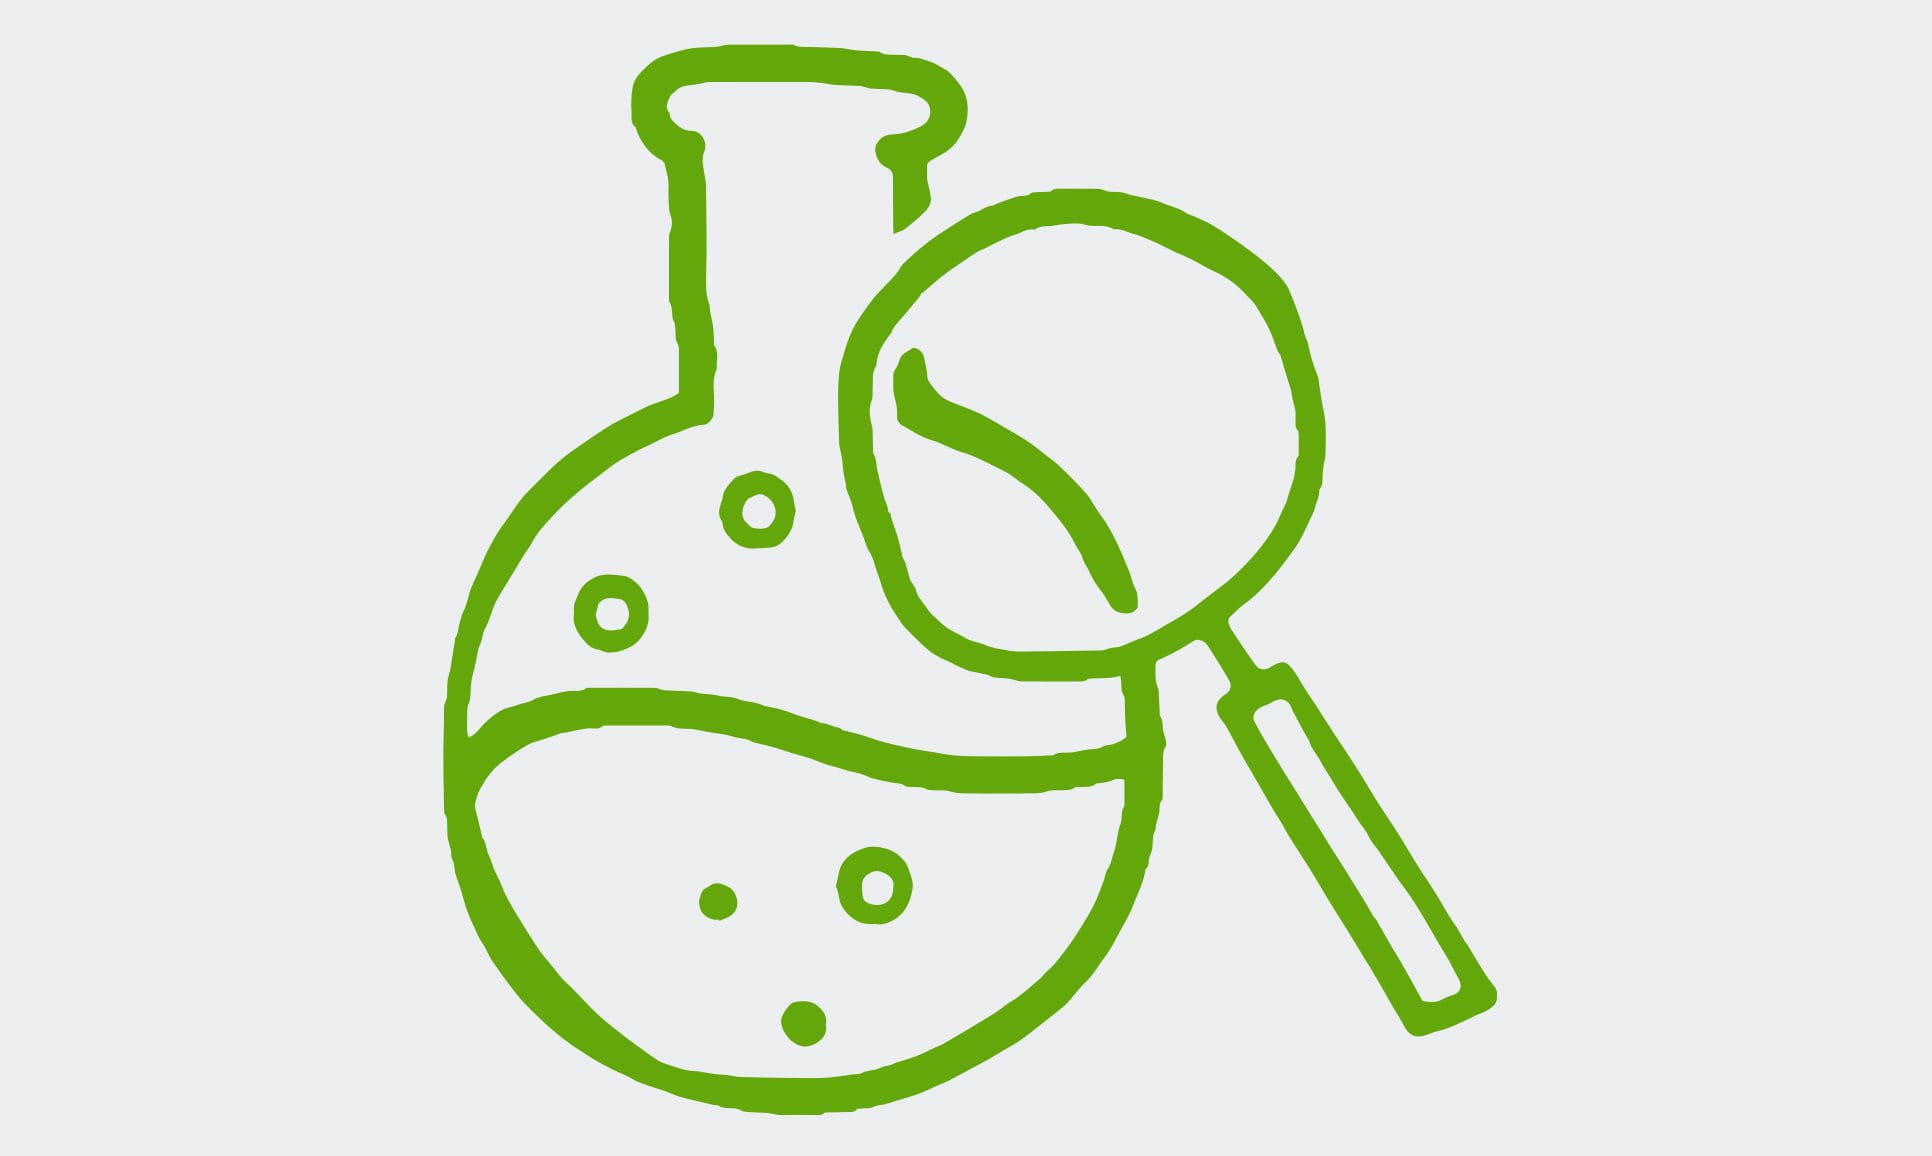 Abstract green illustration of a magnifying glass examining a glass vial